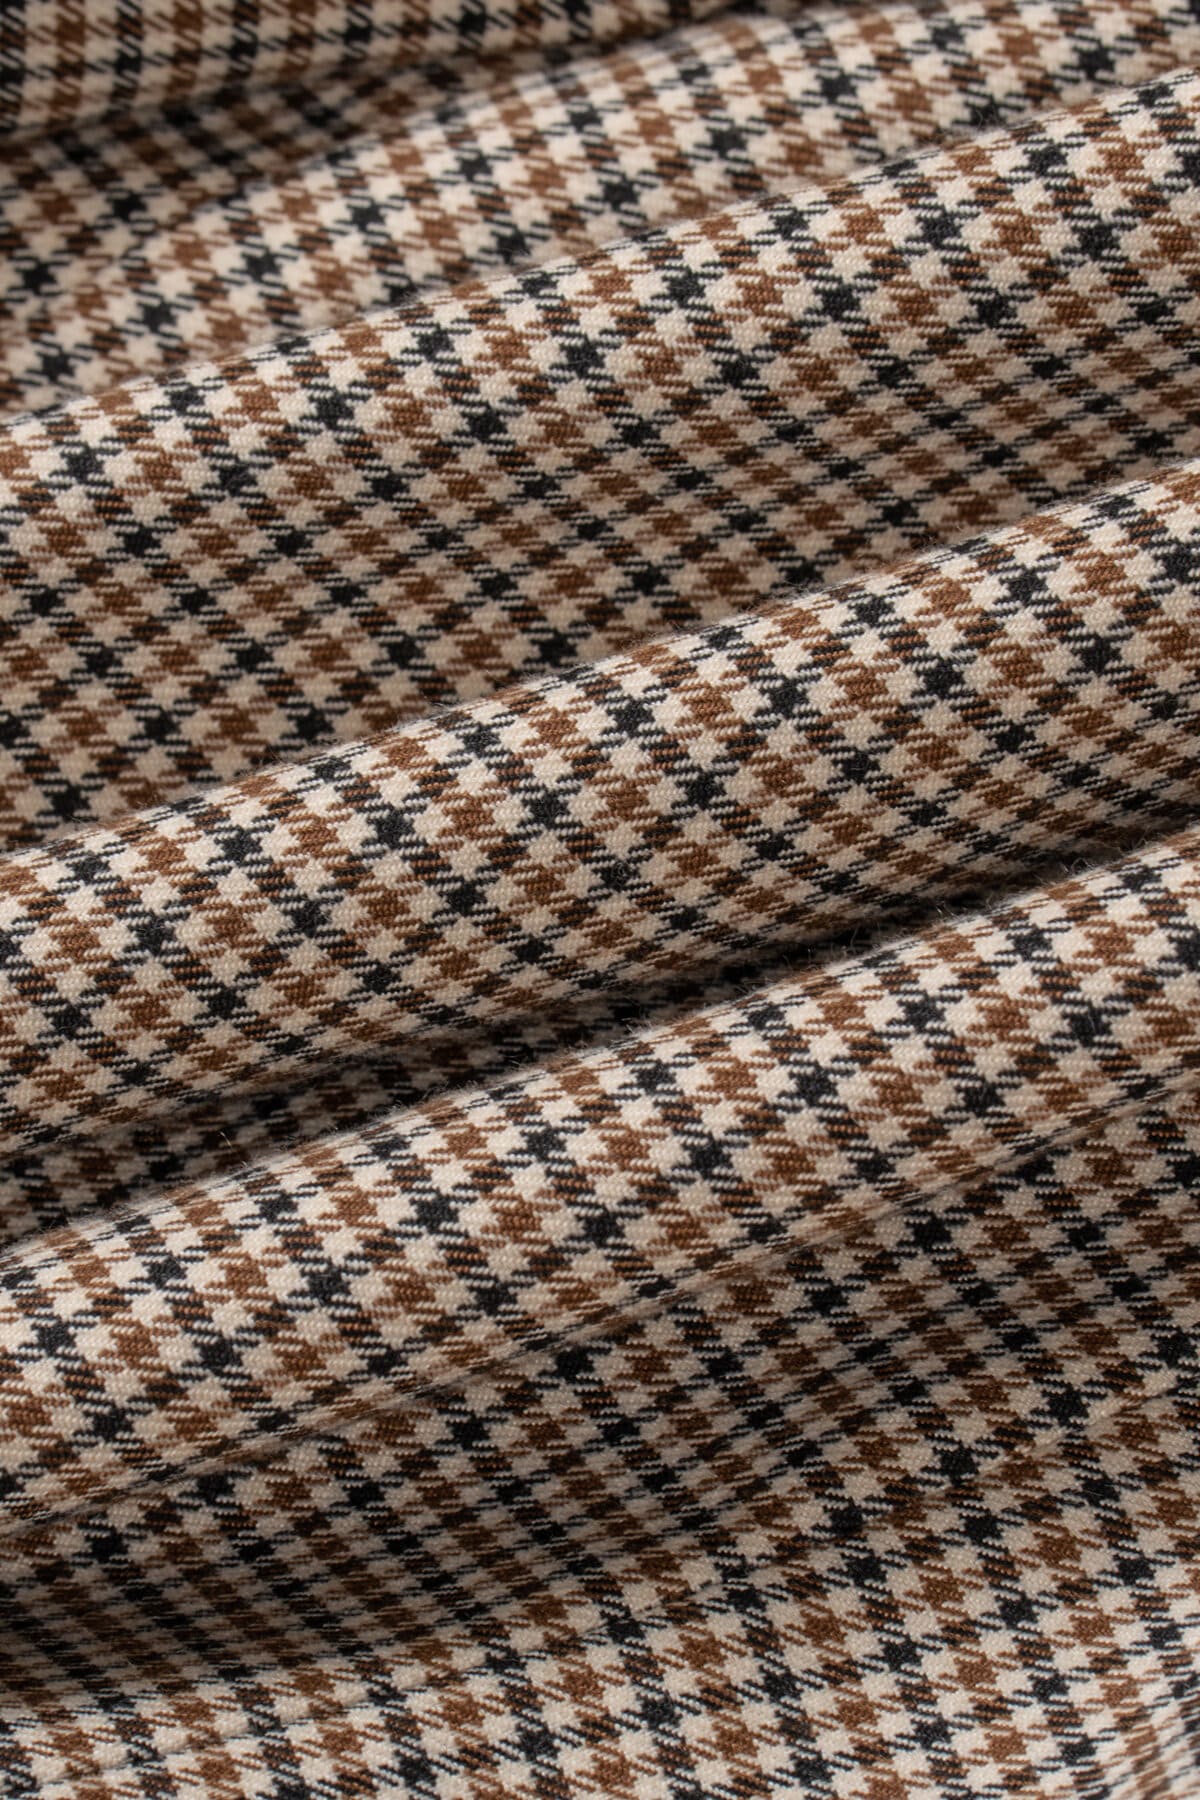 Elwood Houndstooth Suit Swatch